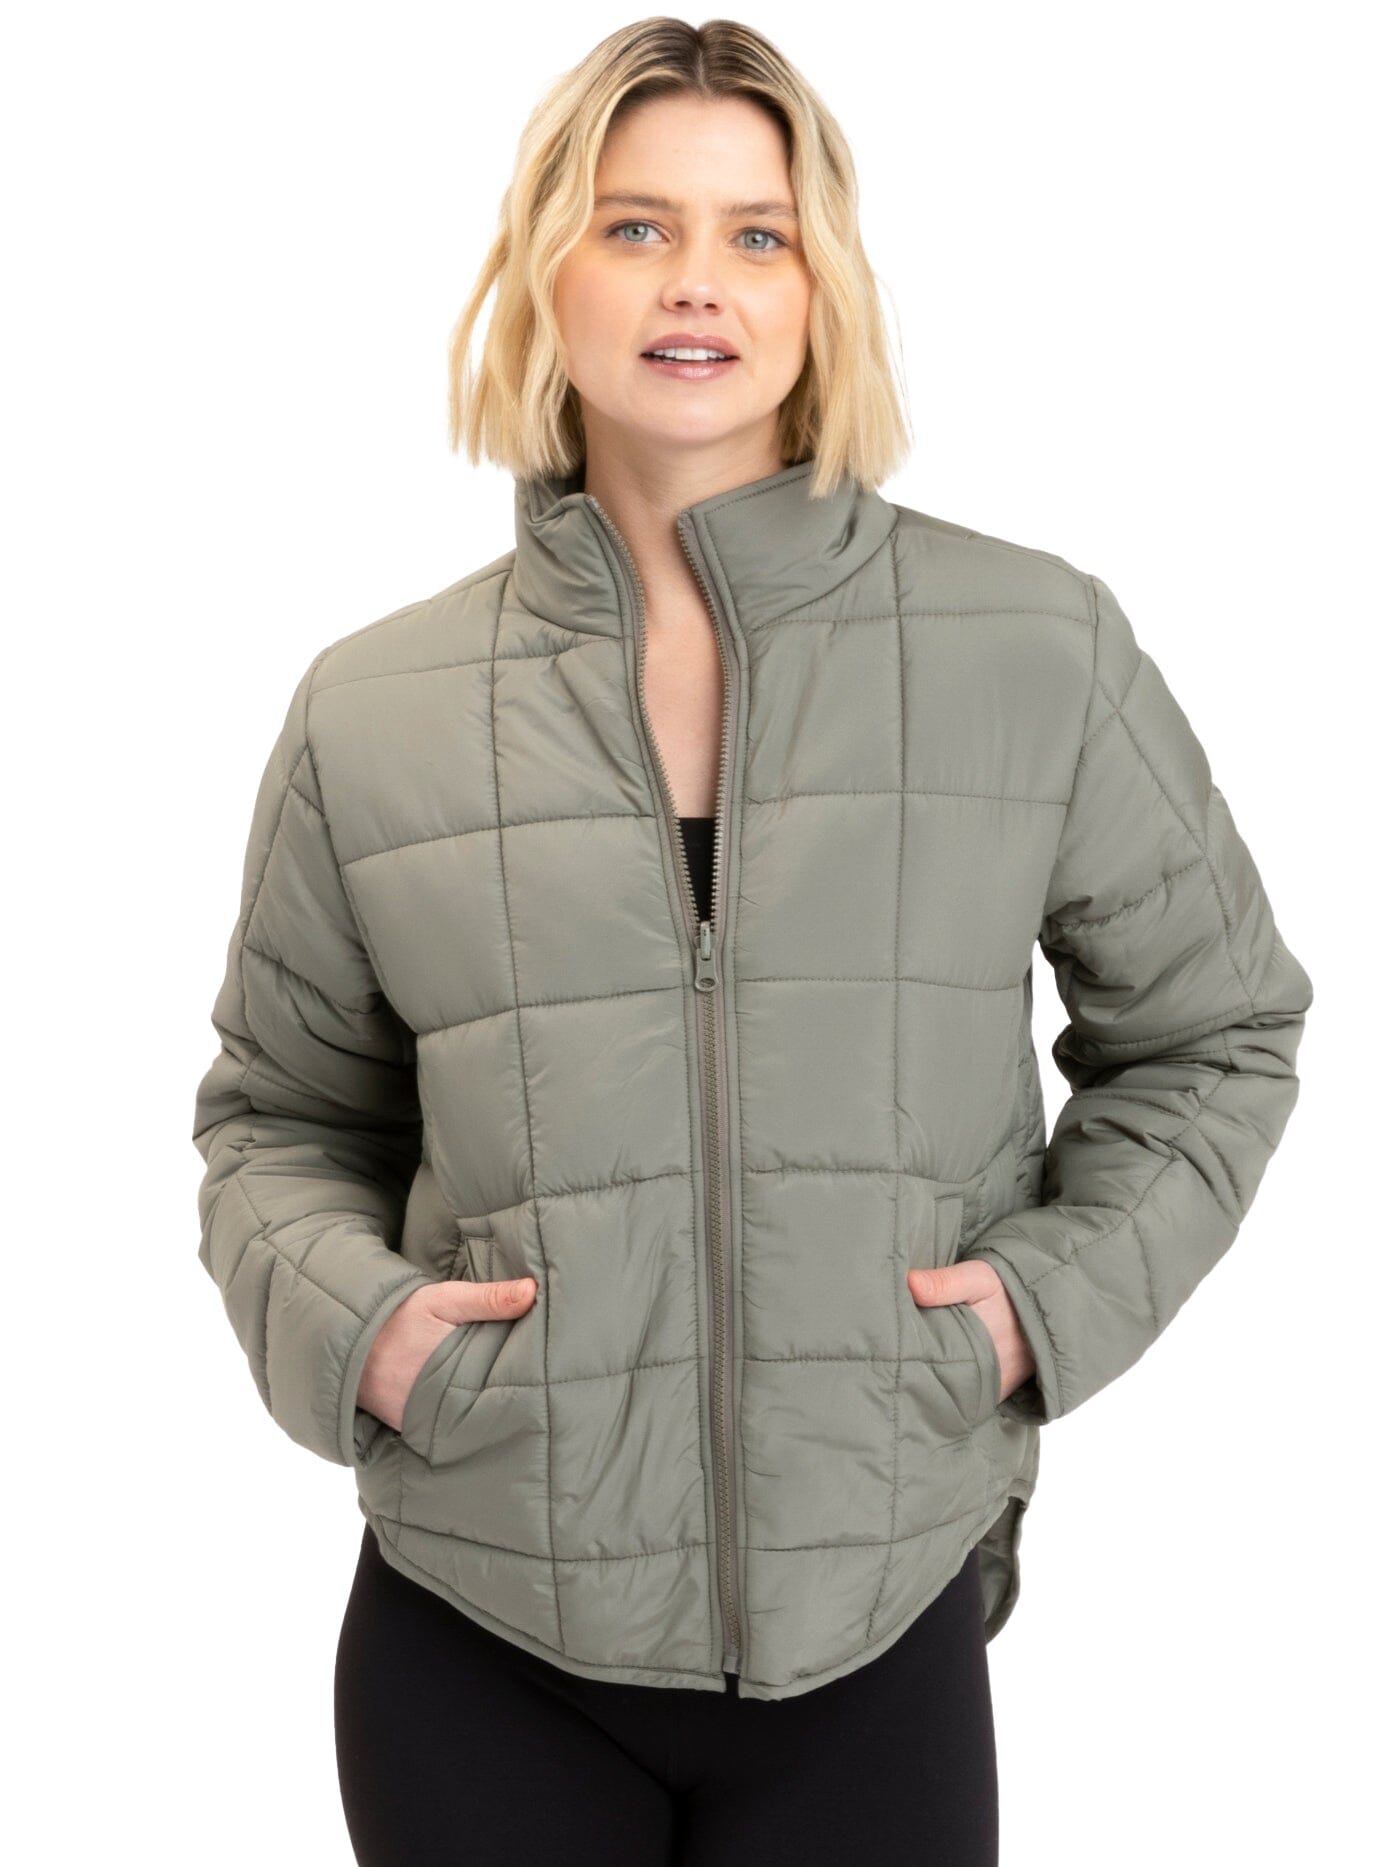 Athene Packable Puffer Jacket Womens Outerwear Jacket Threads 4 Thought 